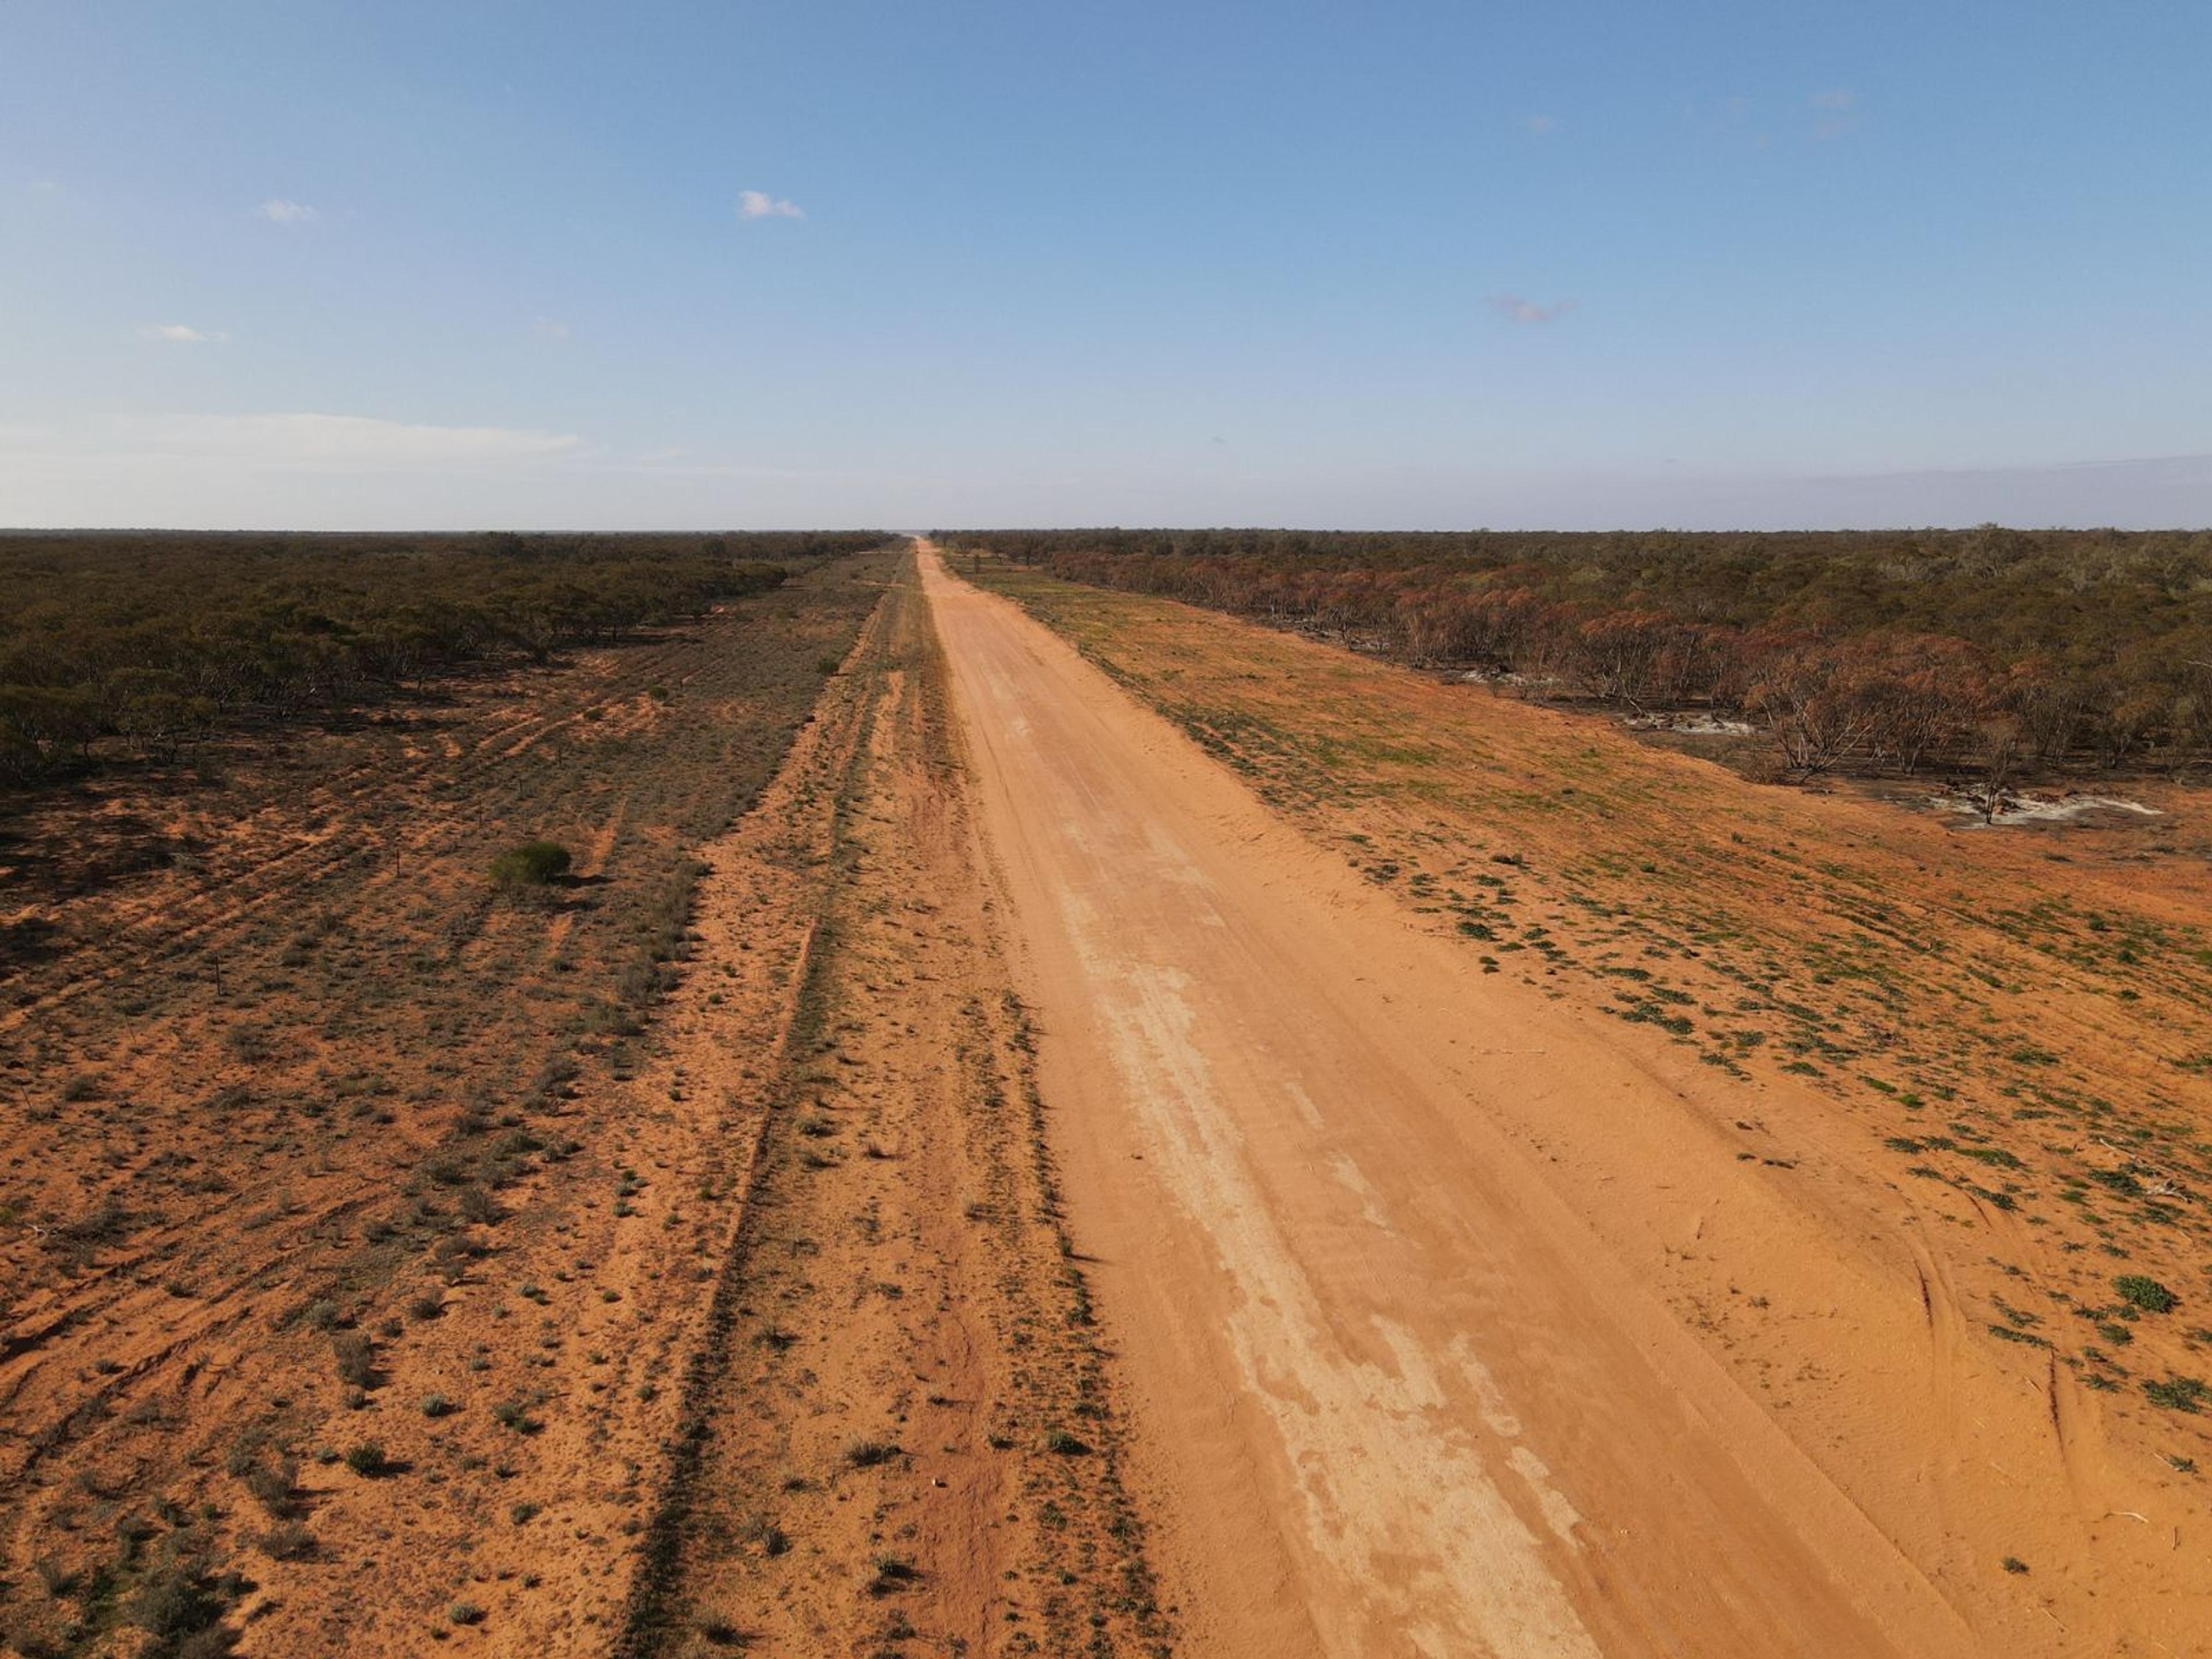 A long straight dusty road in the outback stretching out to the horizon.